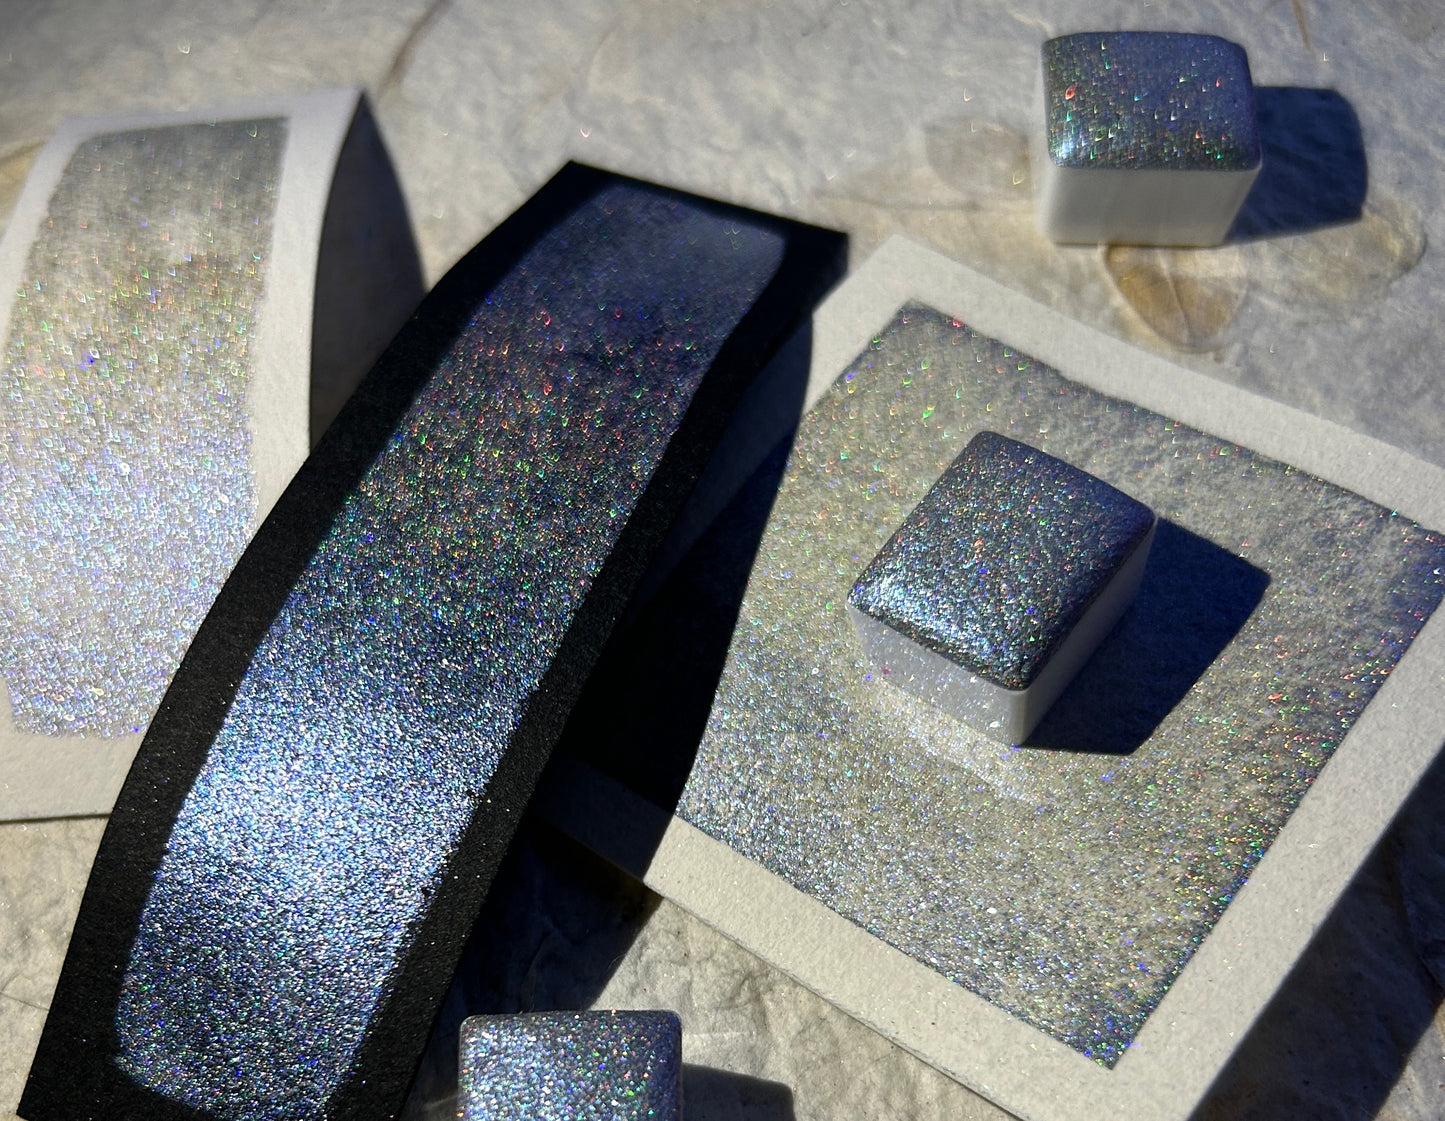 ✨New✨ "Angel Dust" - Blue-ish Holographic Pigment